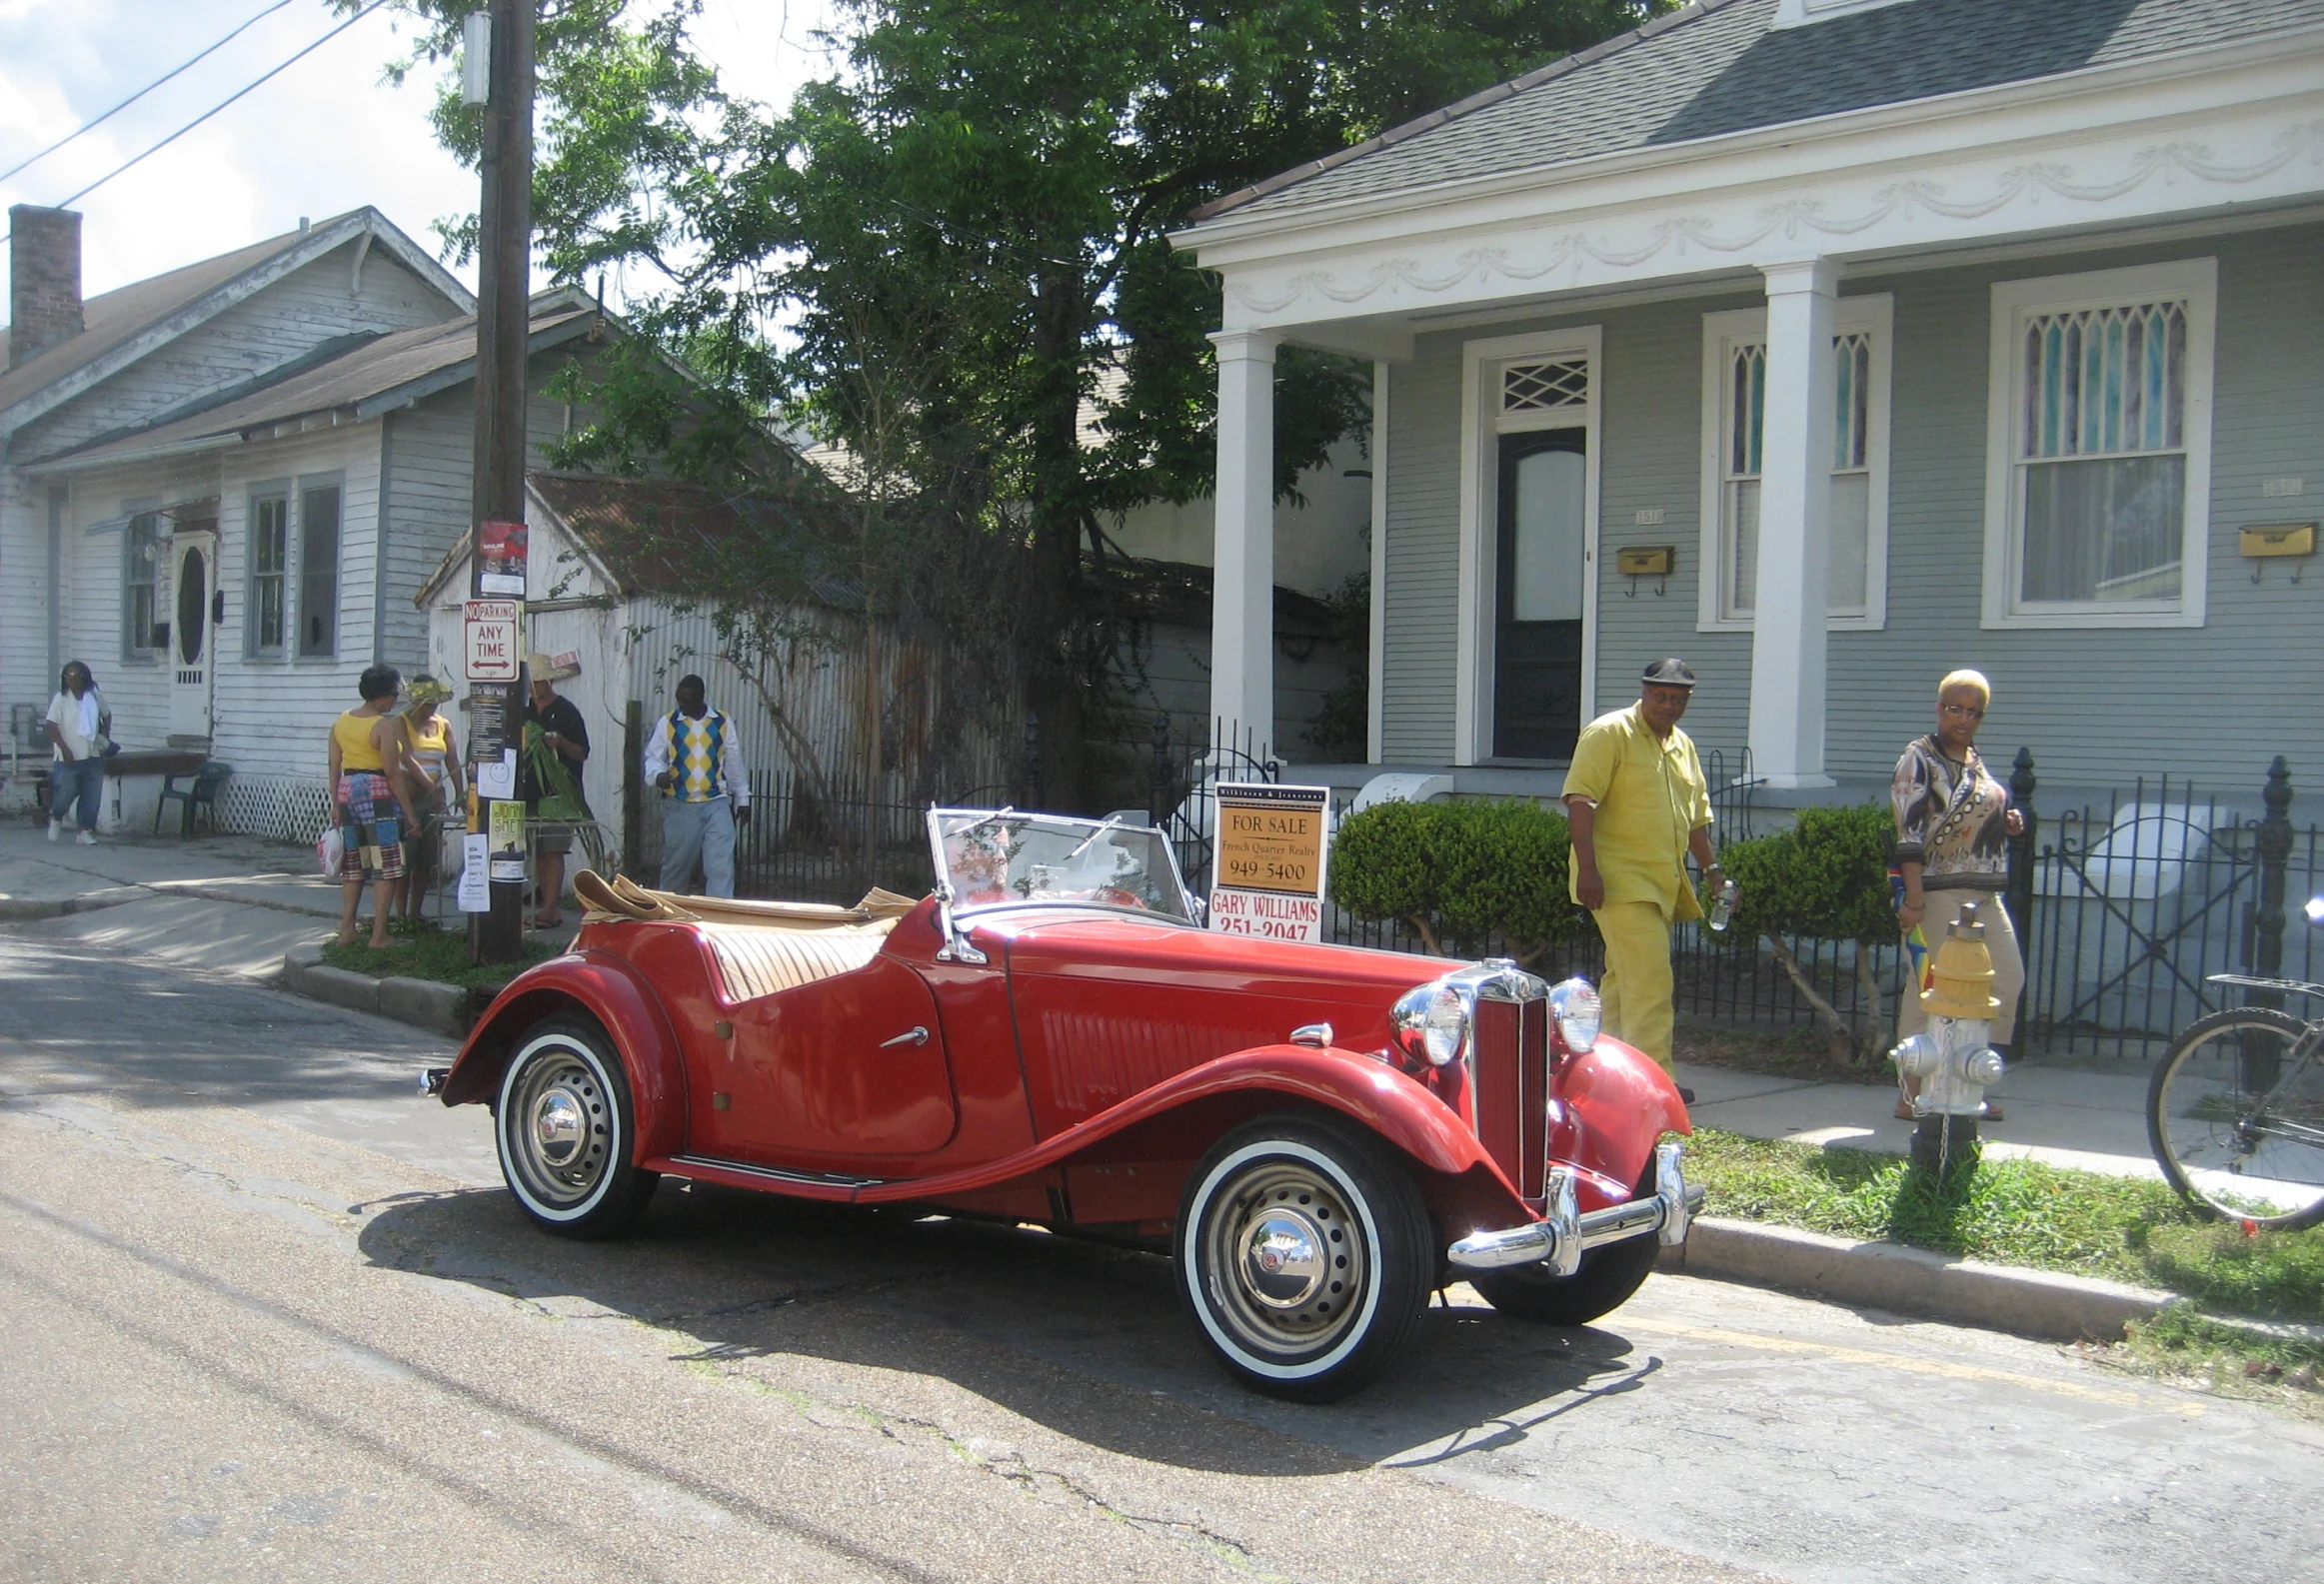 the old fashioned car is parked in the street